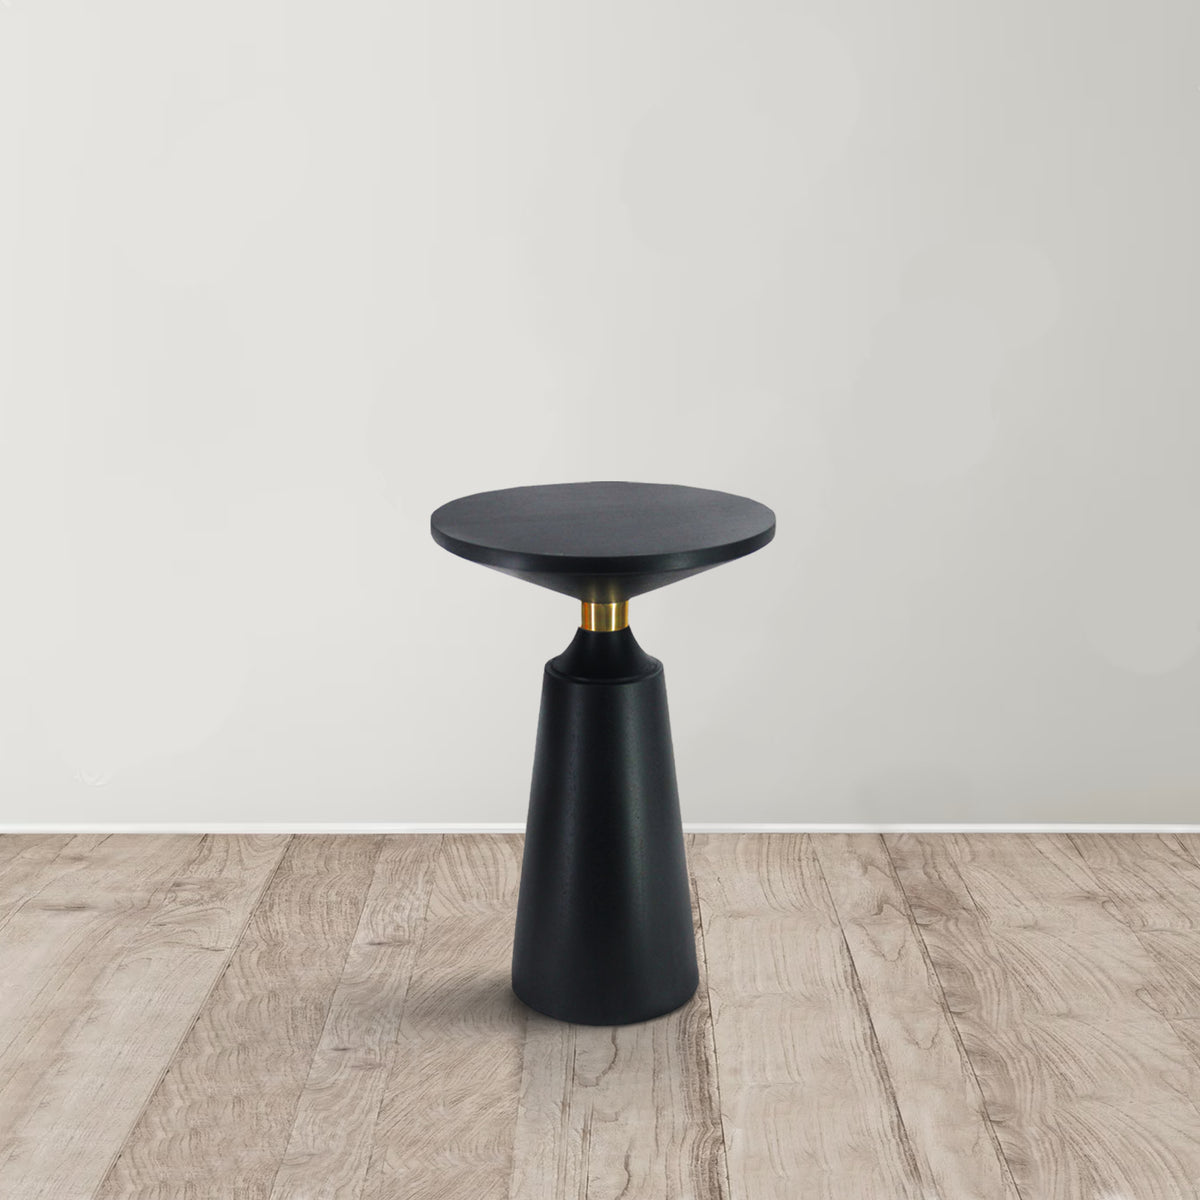 Fawn 20 Inch Side End Table, Black Mango Wood Round Top with Pedestal Base, Shiny Brass Support - UPT-295602